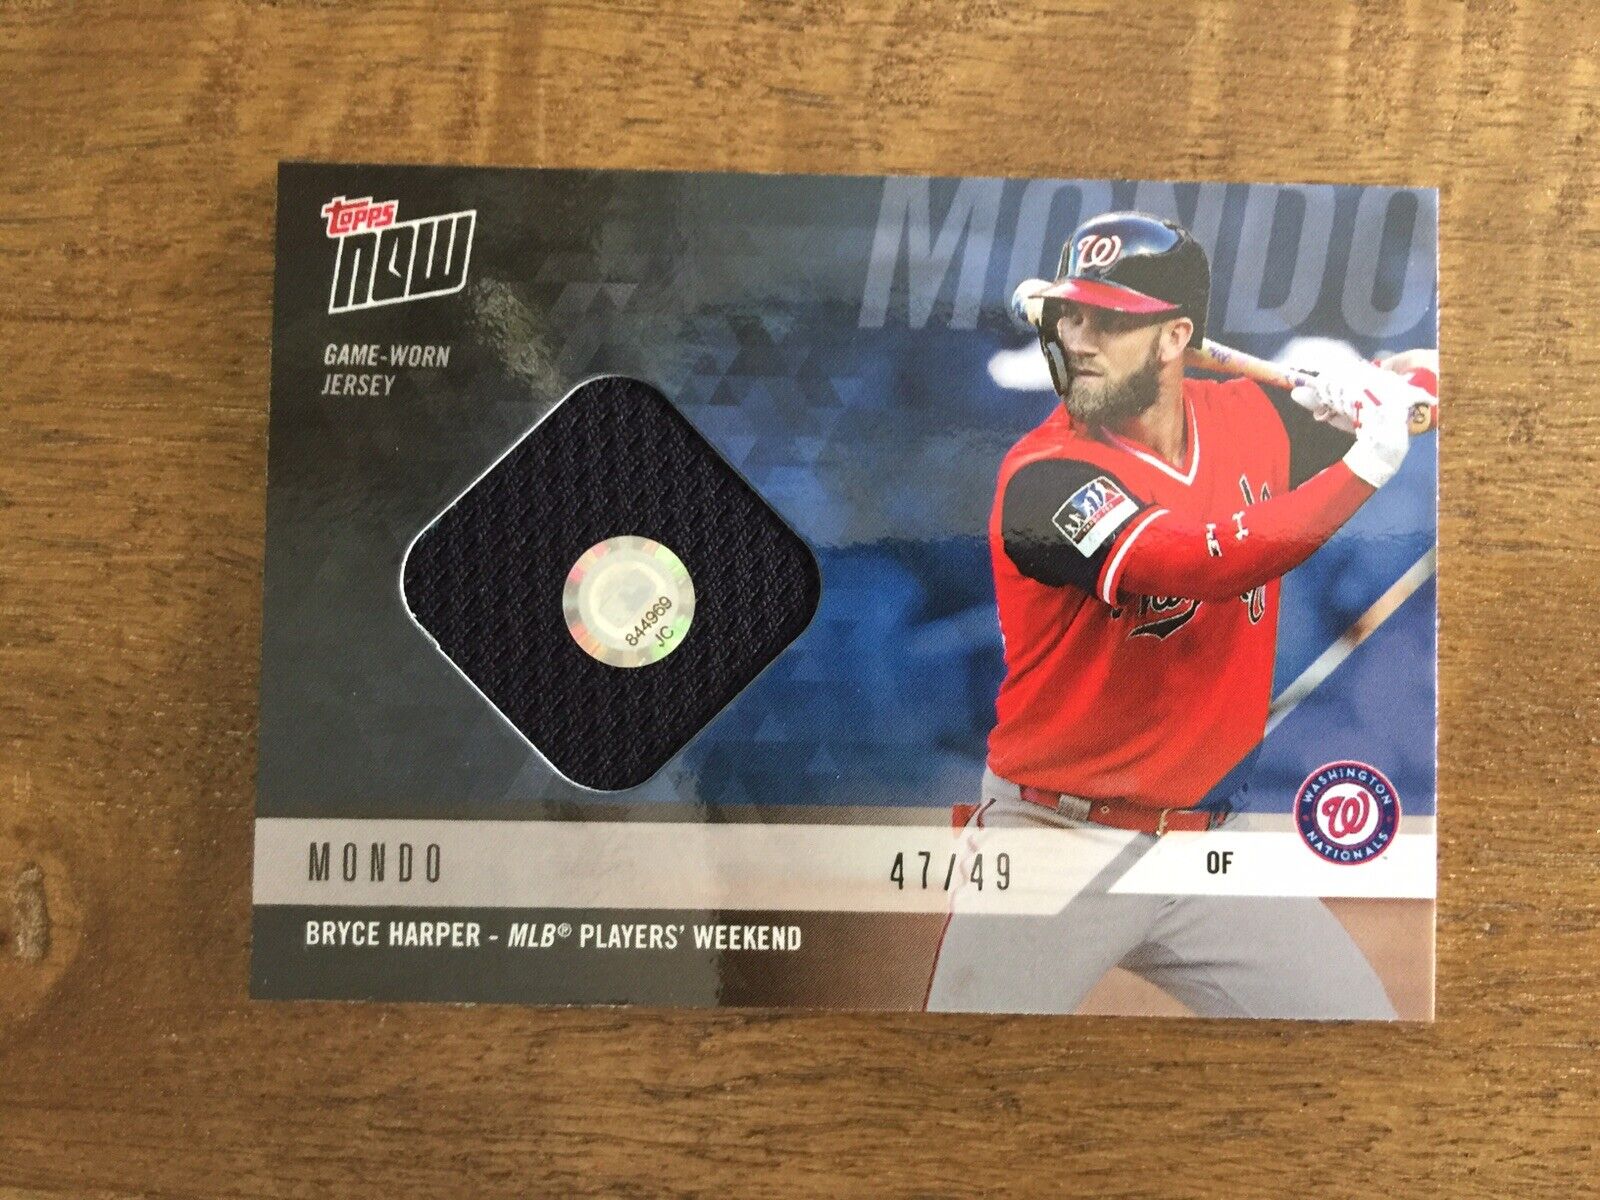 2018 Topps Now Bryce Harper Players Weekend 47/49 Jersey Relic Game Used